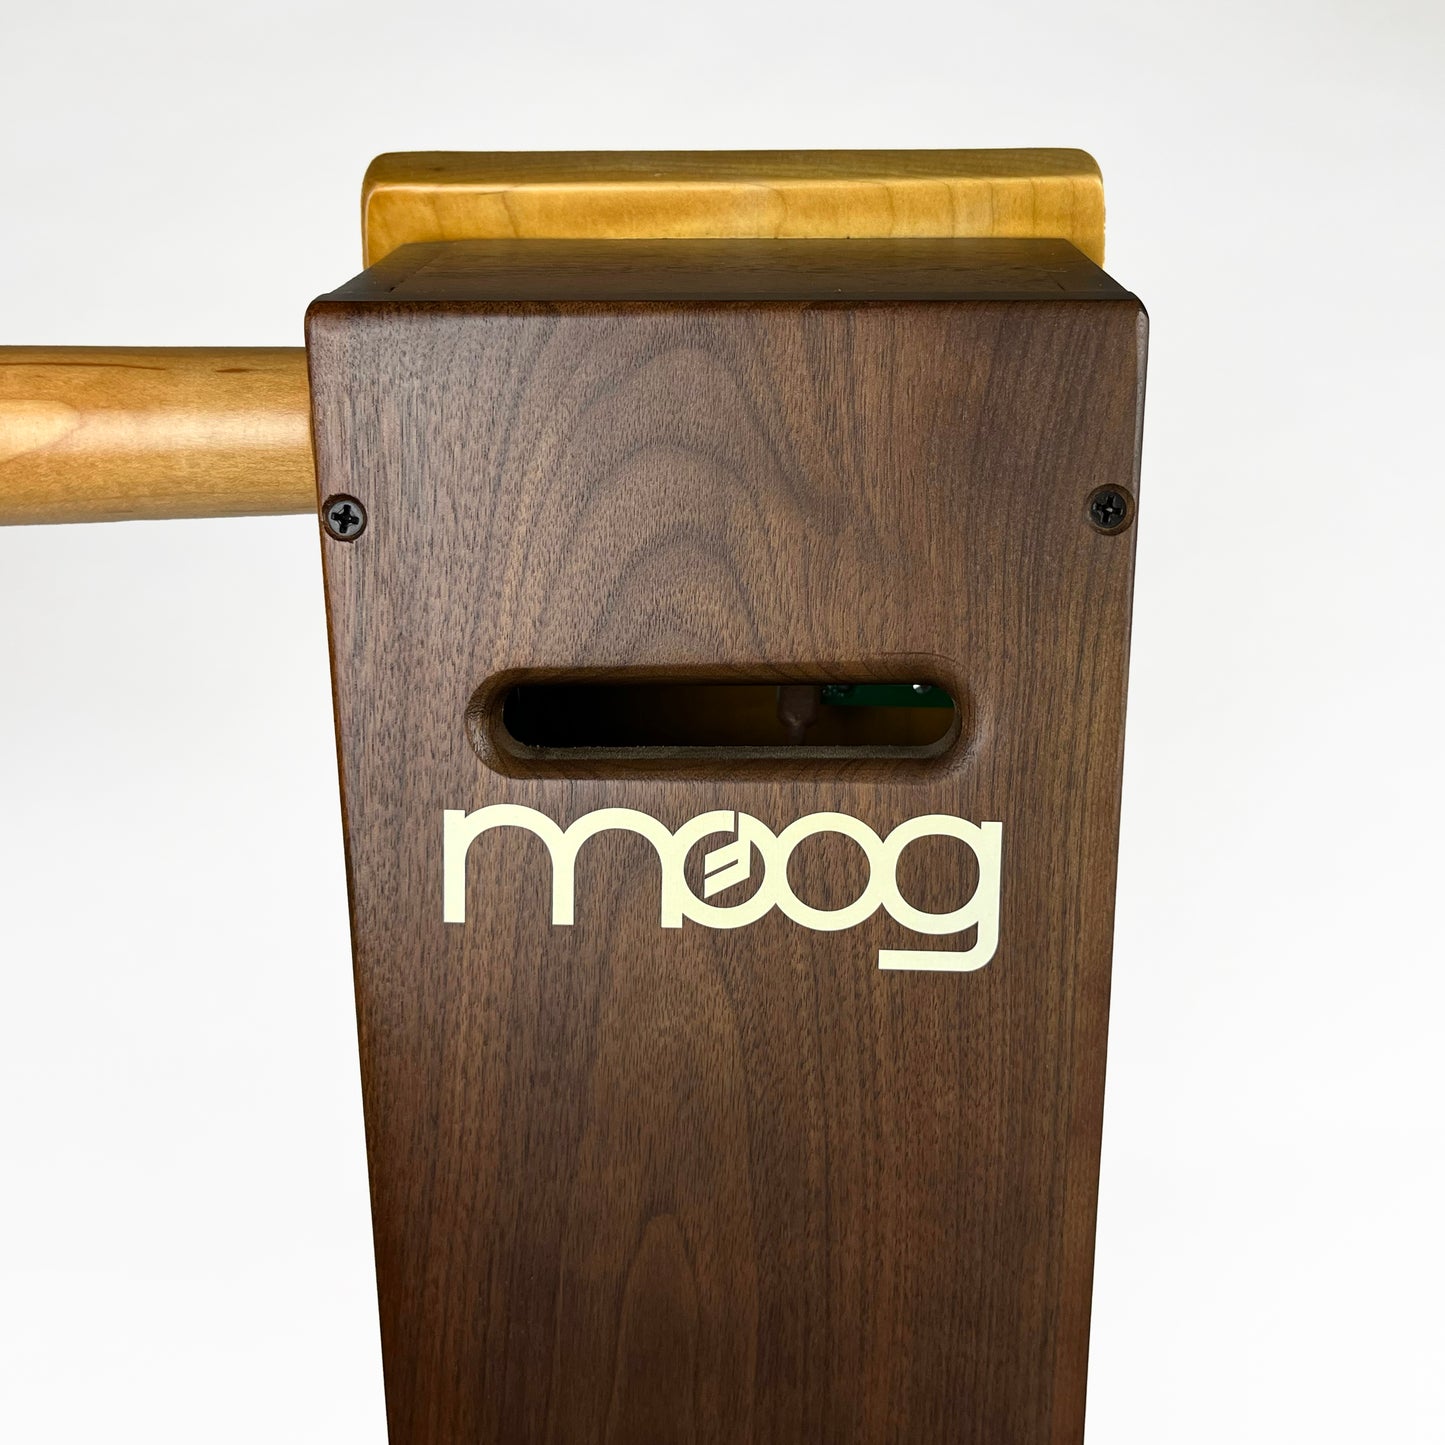 Moog Etherwave Pro Theremin, brand new, old stock (N.O.S.)